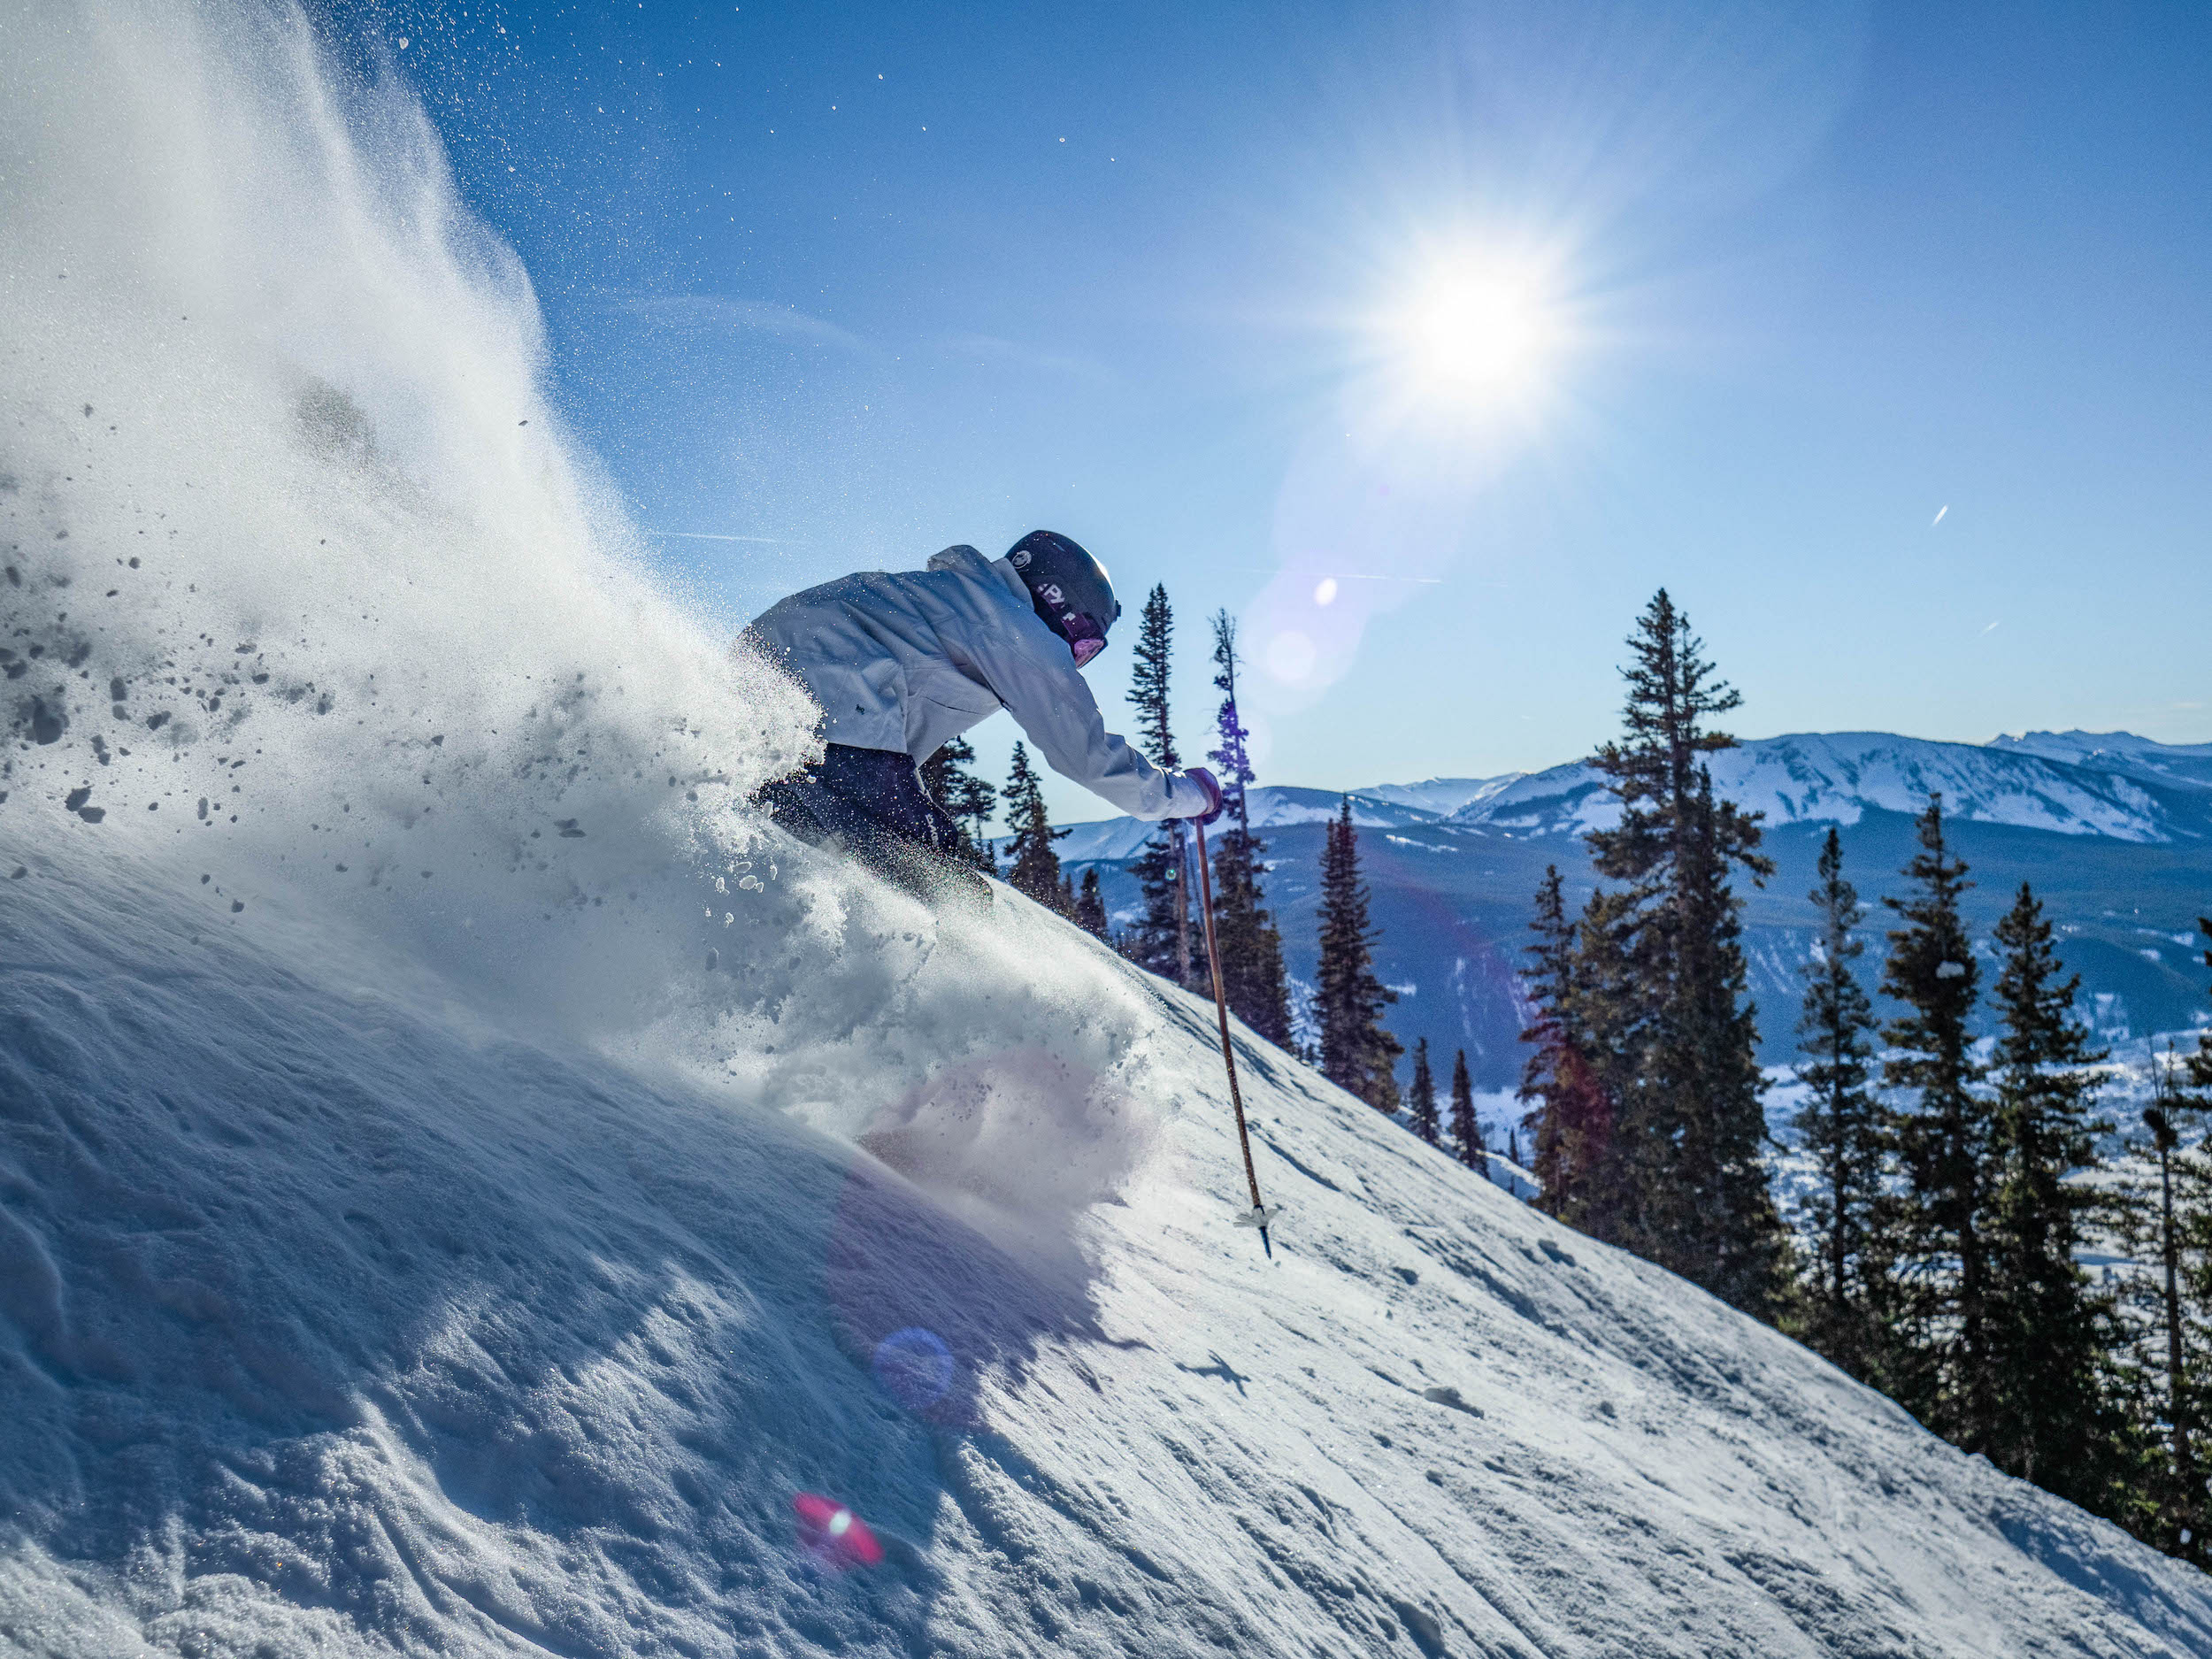 A person creating a powder wave while skiing the extremes in Crested Butte. Extreme skiing is what Crested Butte is known for